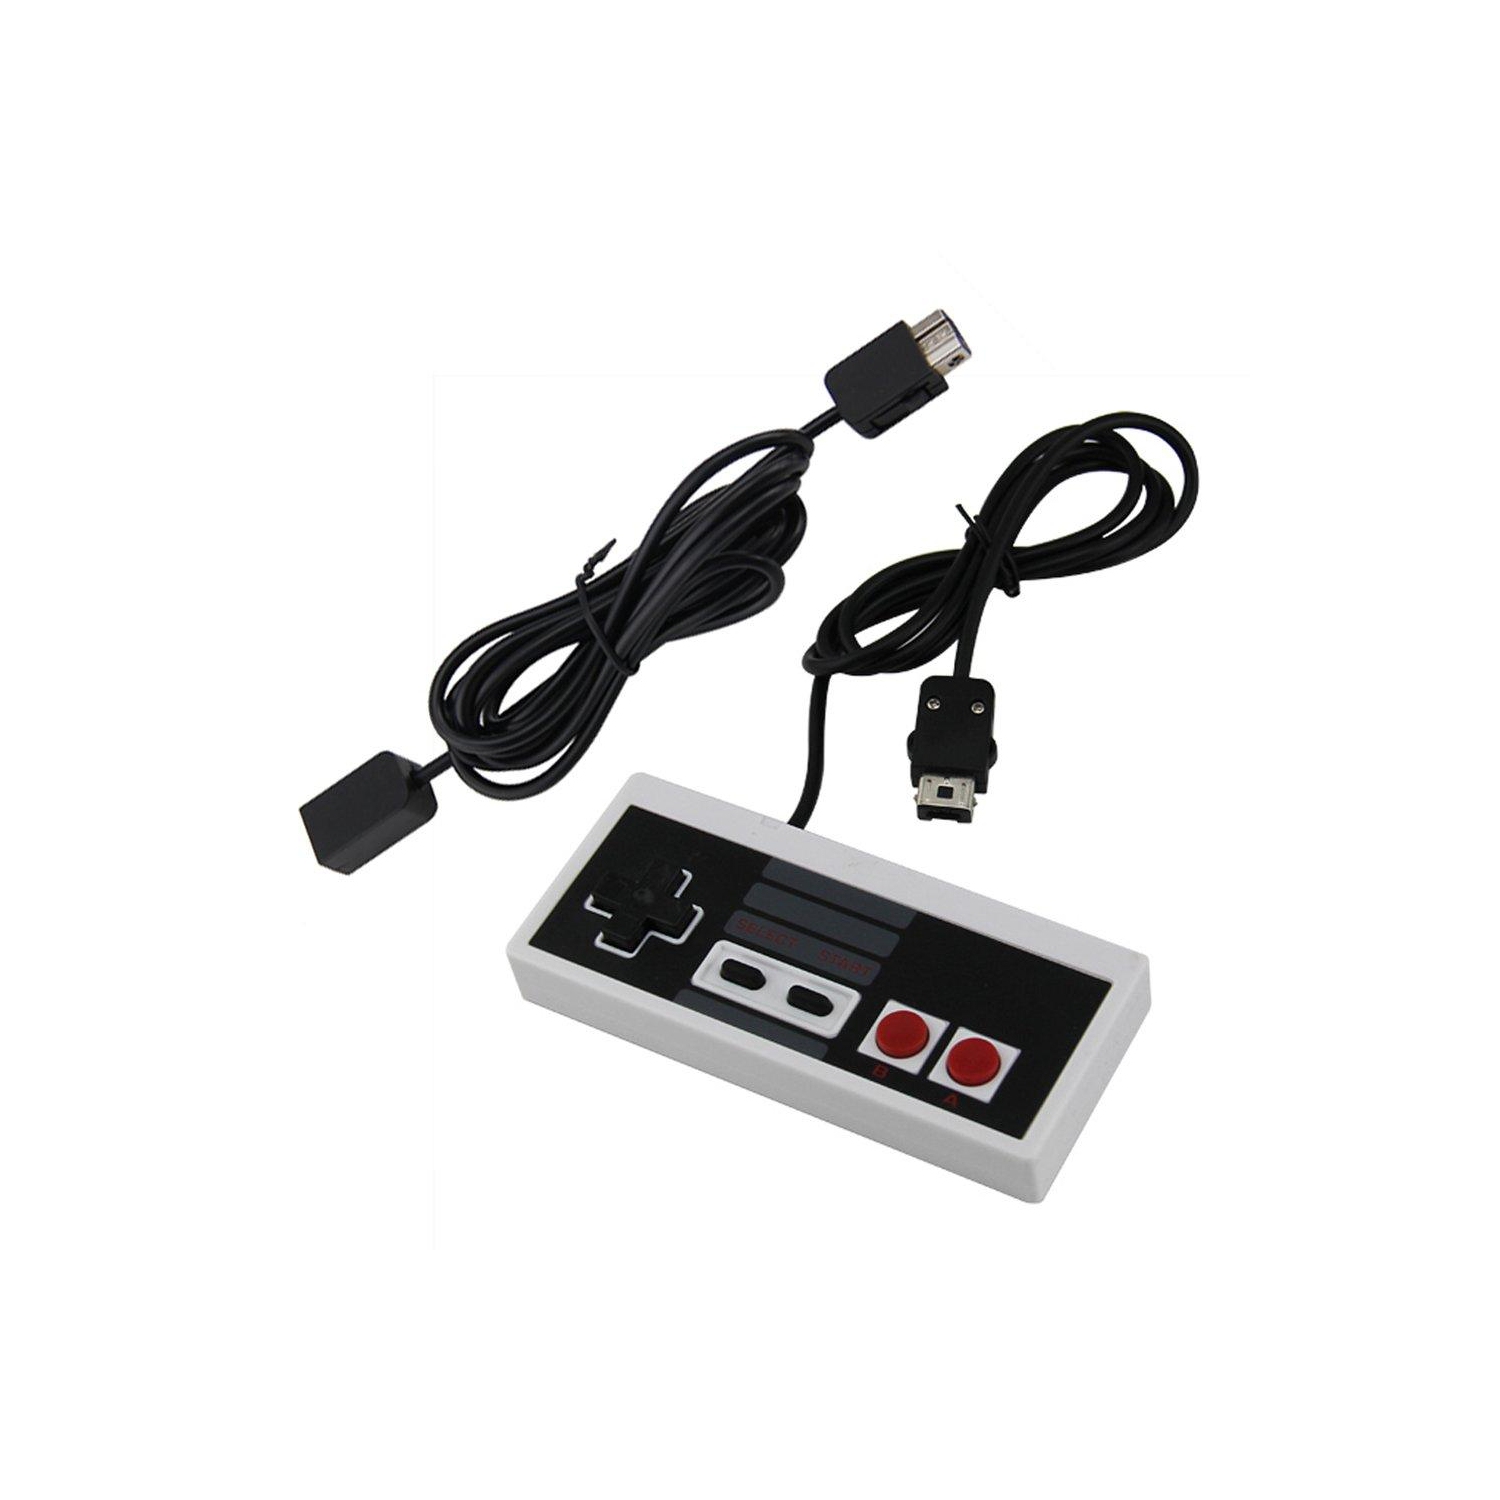 NES Classic Mini 2016/SNES NES MINI 2017 Controller- With 6ft Link Extension Cable with 1.8m Cable by Evoretro